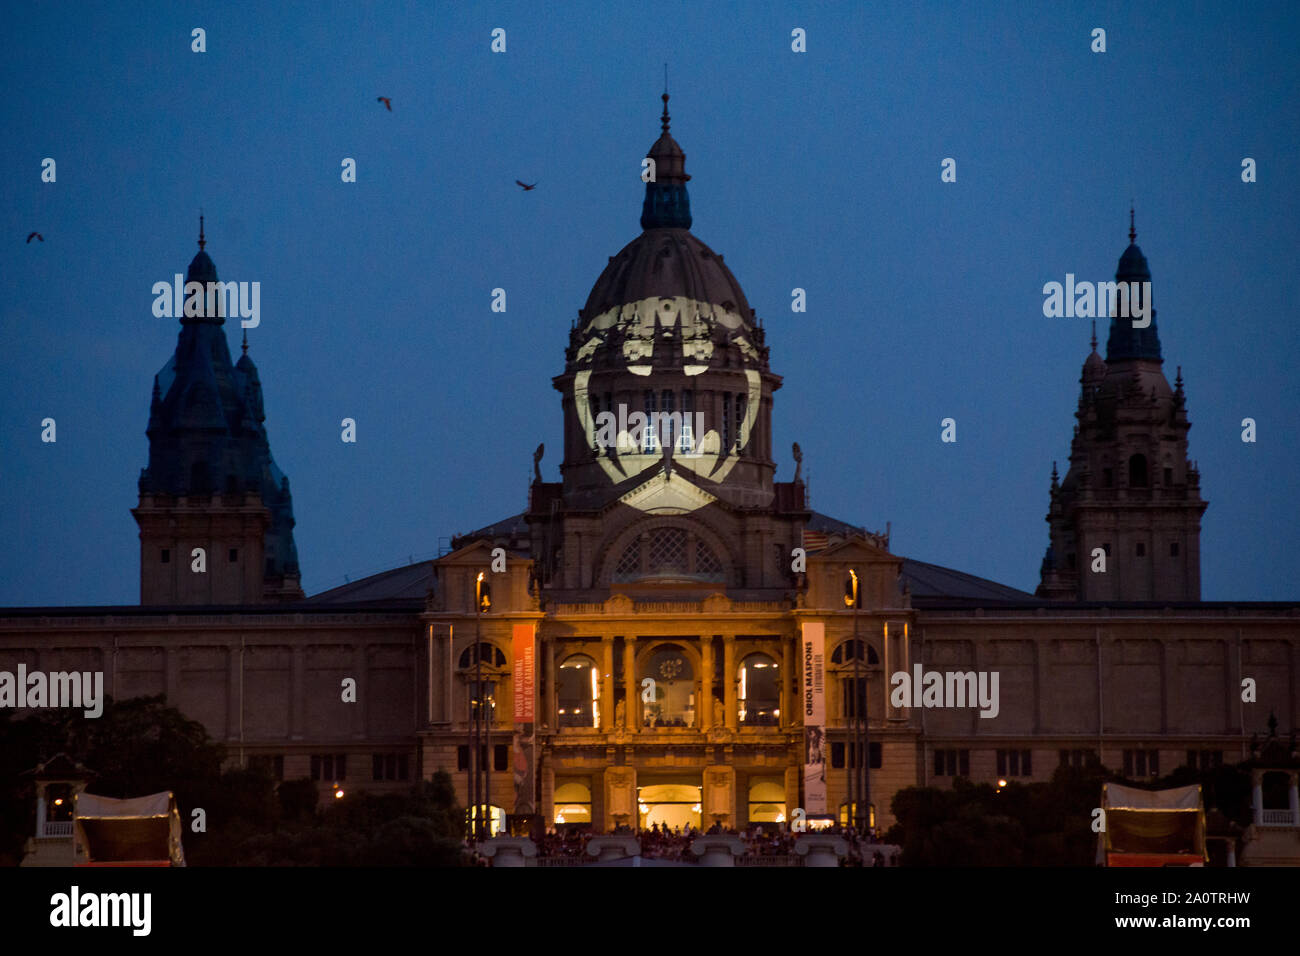 Batman Bat signal appears projected on the facade of the  Palau Nacional de Montjuic in Barcelona on occasion of the character’s 80th anniversary. Stock Photo